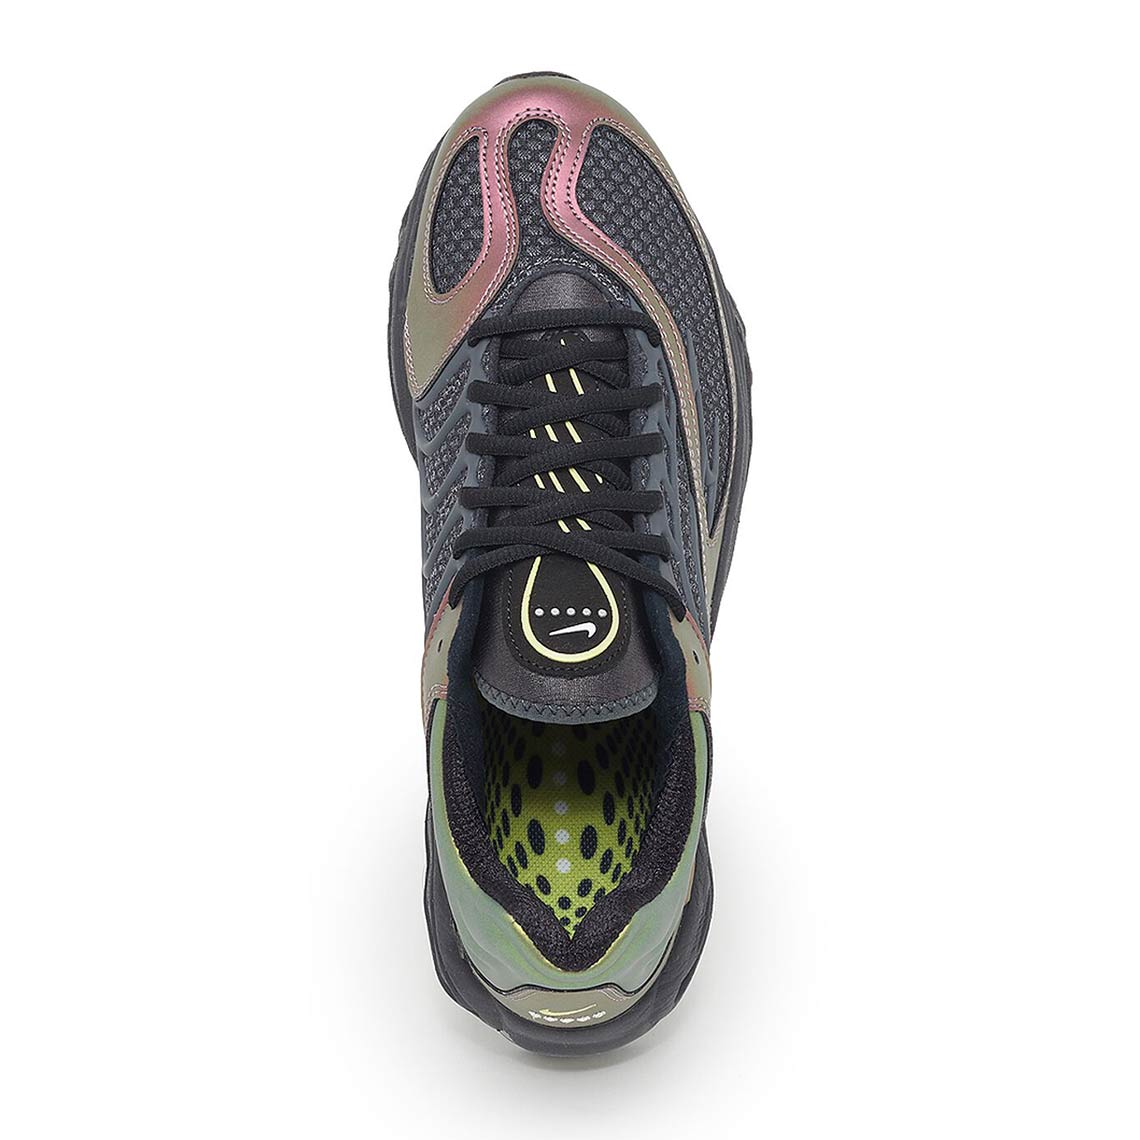 Nike Air Tuned Max Celery Store List 4